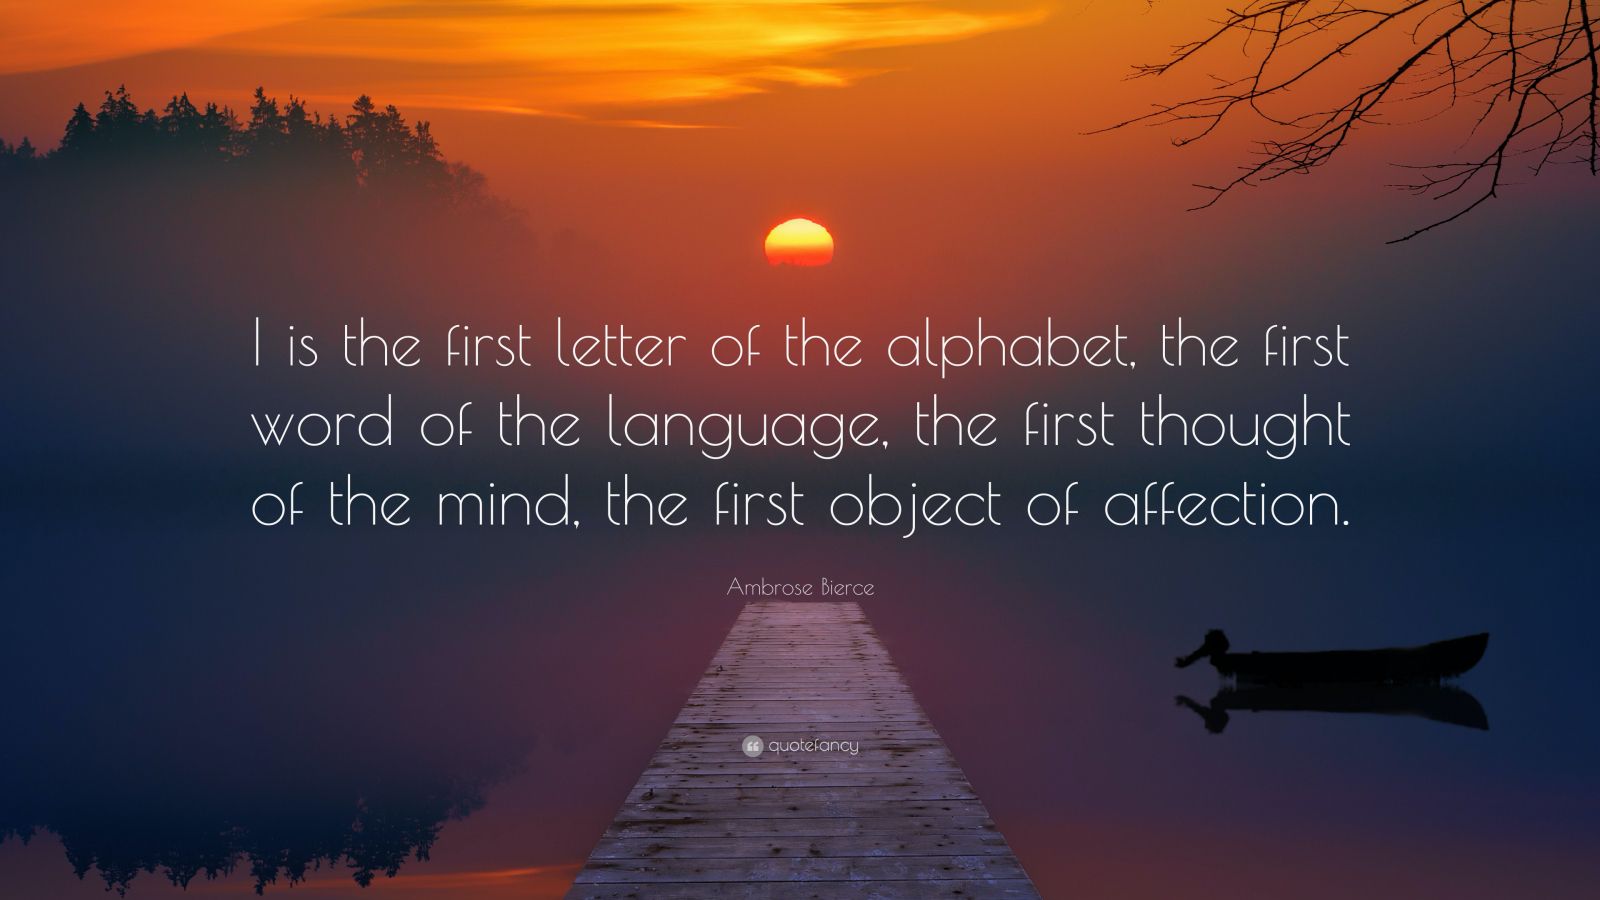 ambrose-bierce-quote-i-is-the-first-letter-of-the-alphabet-the-first